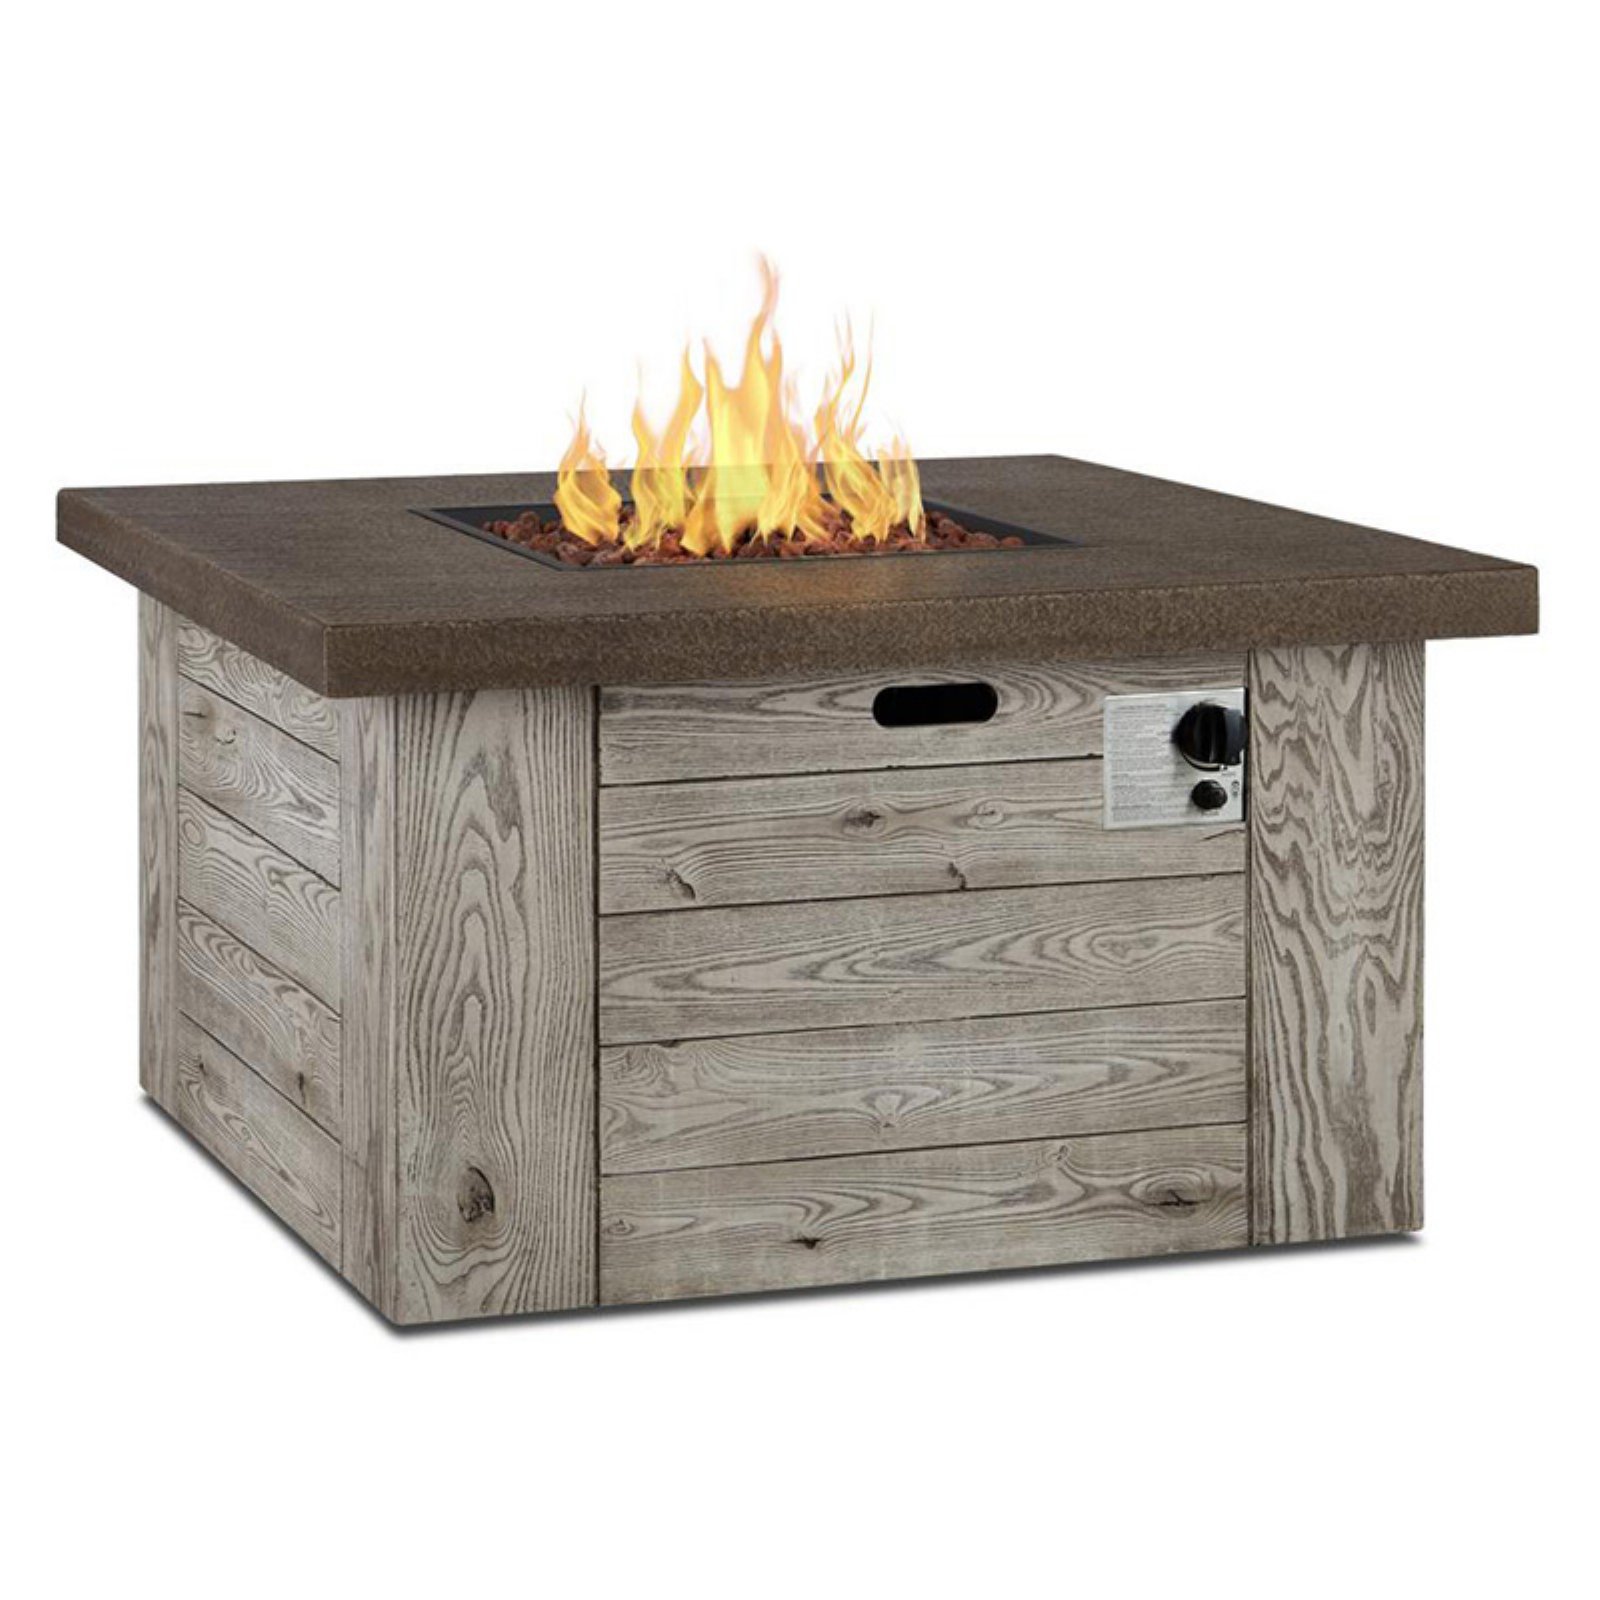 Real Flame Forest Ridge Propane Fire Pit in Weathered Gray - image 1 of 5